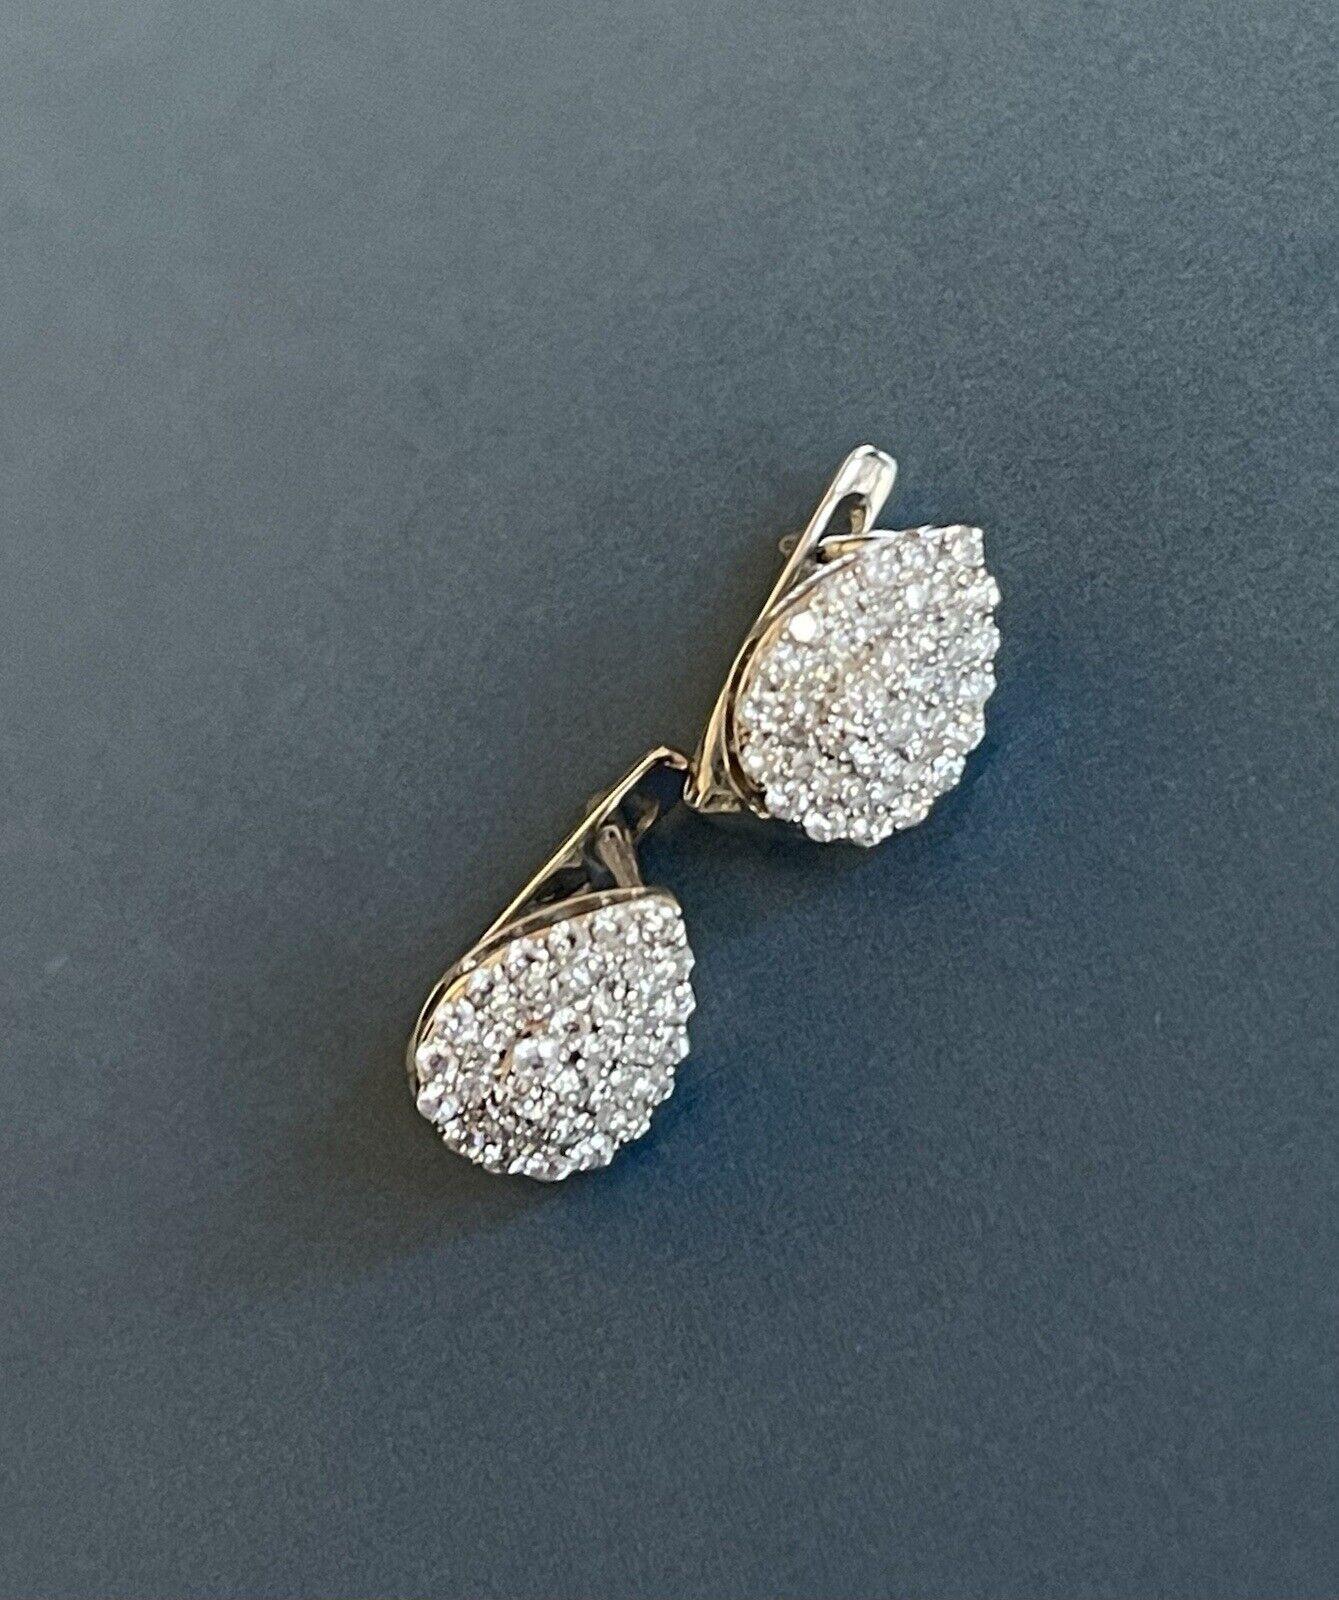 9ct White Gold Diamond Earrings 0.50ct Teardrop halo cluster leverbacks hoops In New Condition For Sale In Ilford, GB